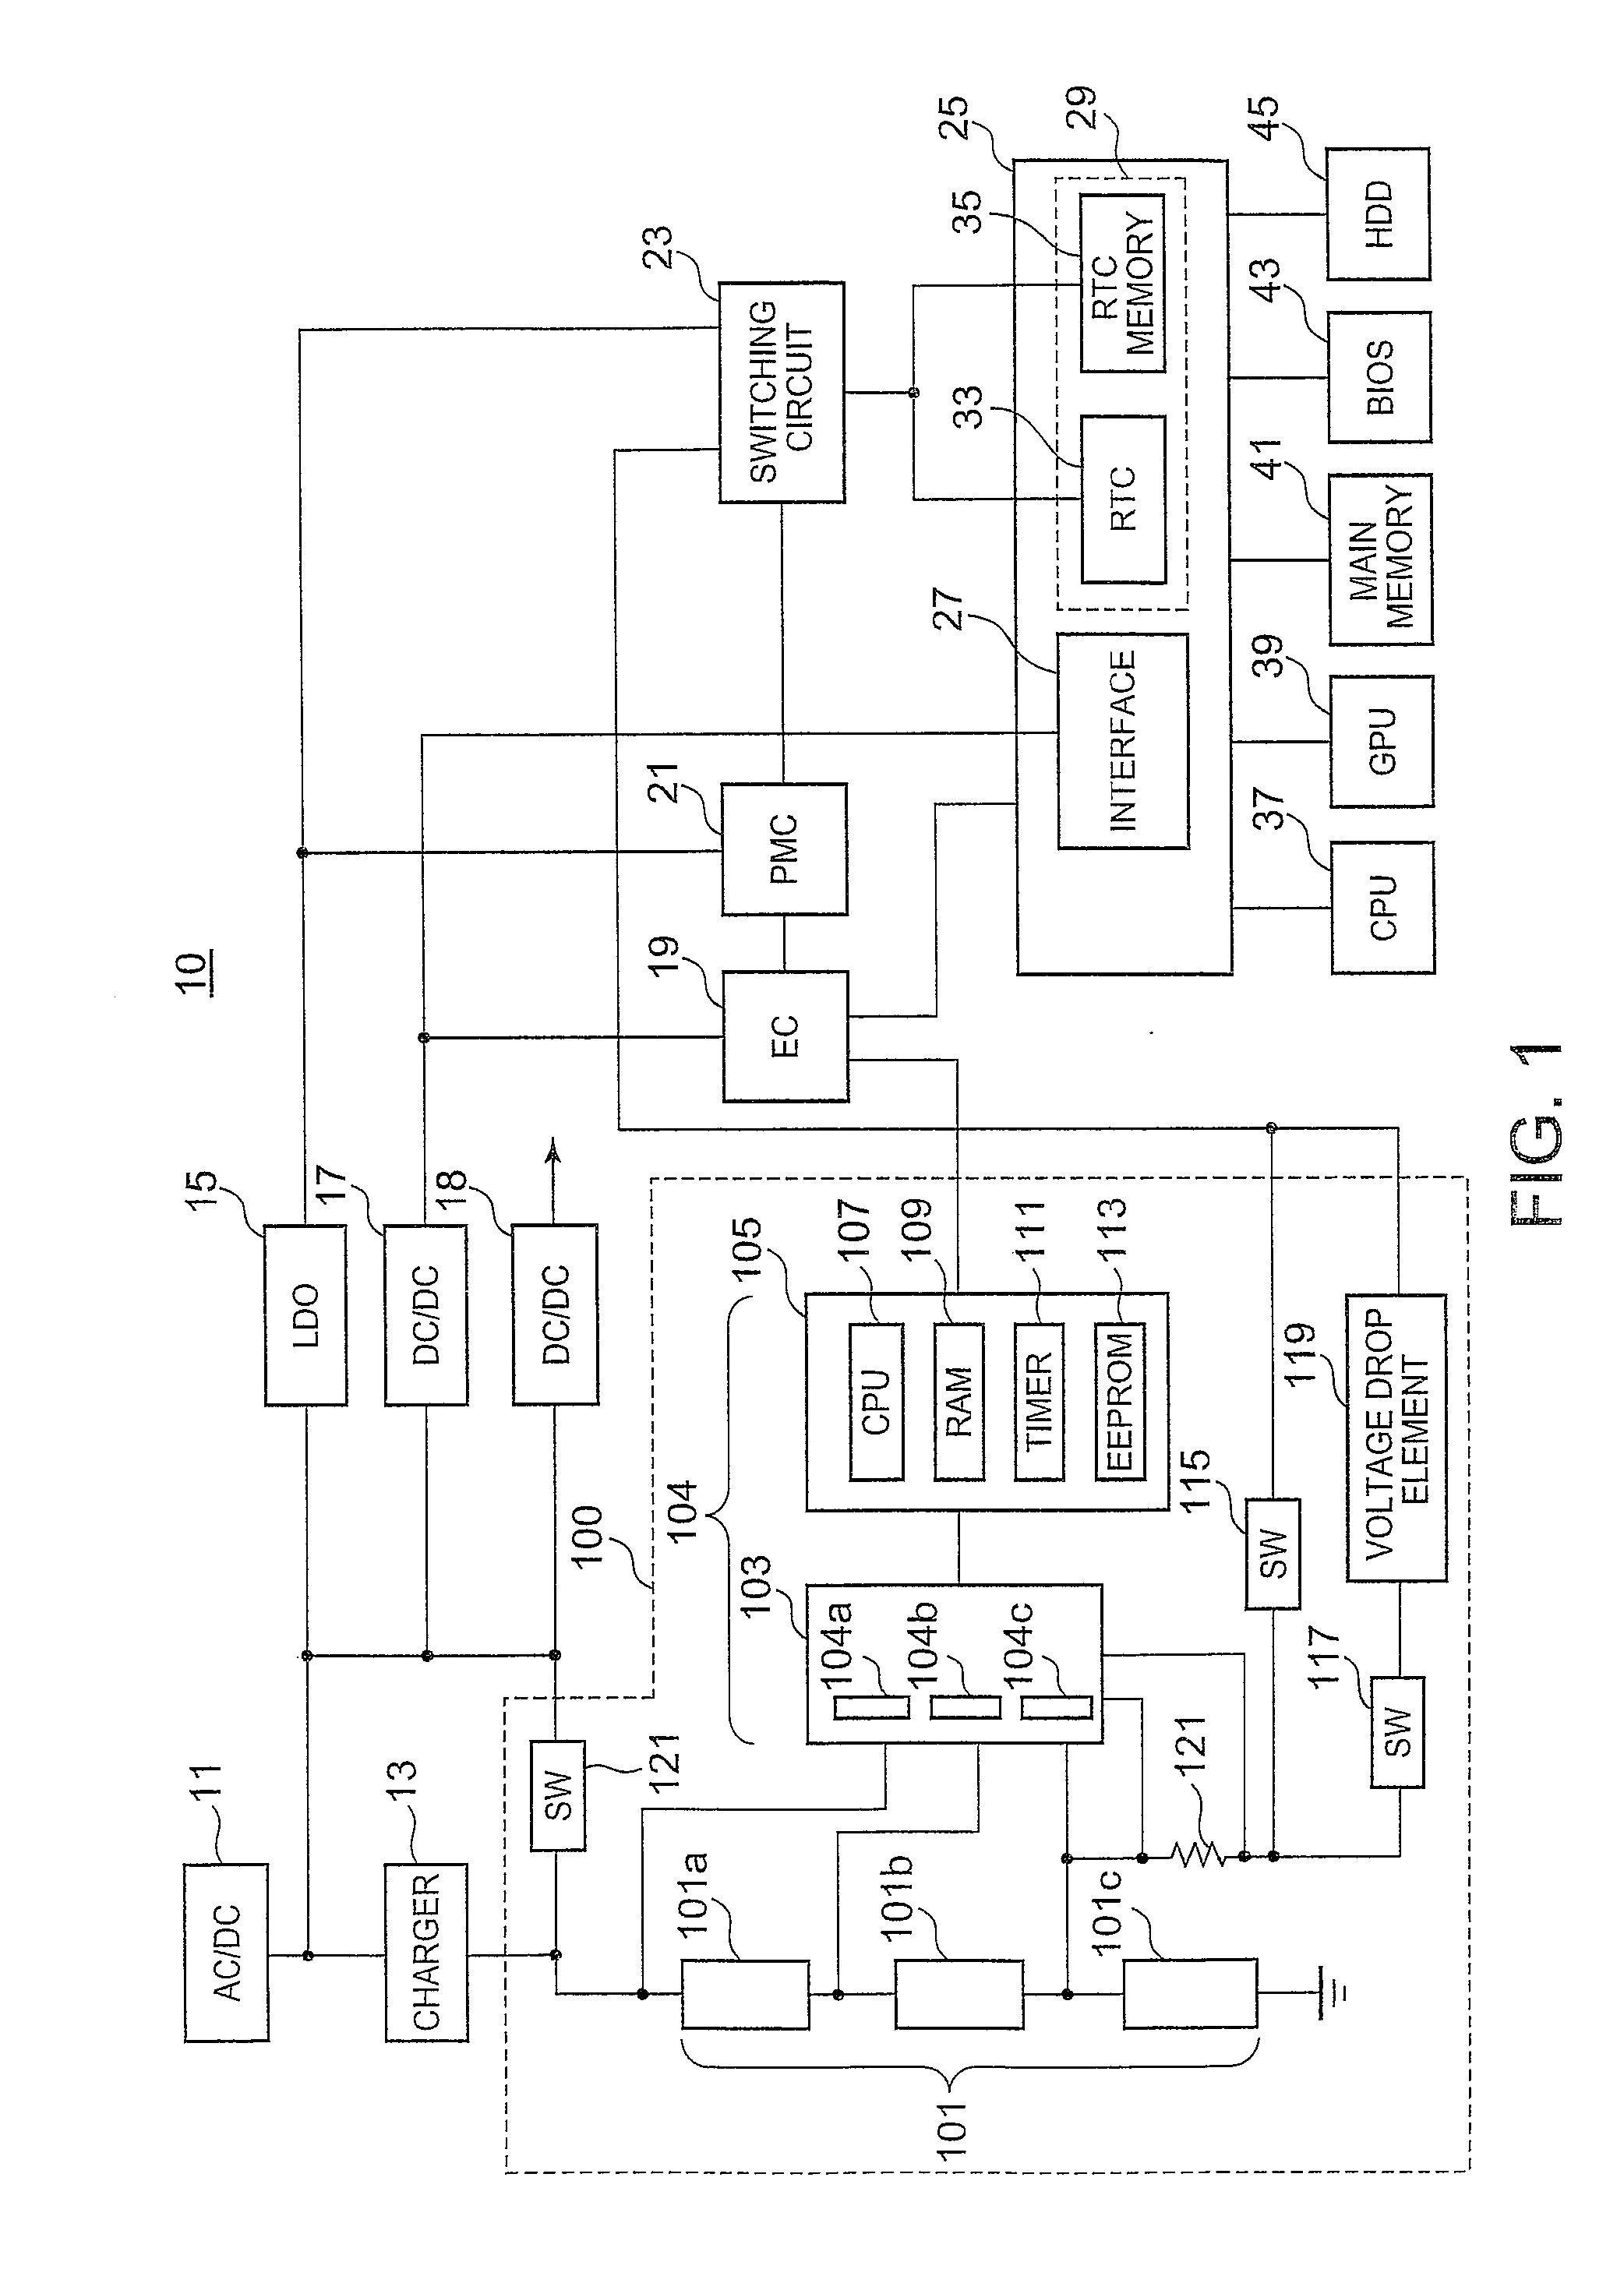 Electric Power System for Portable Electronic Device Having a Timekeeping Circuit